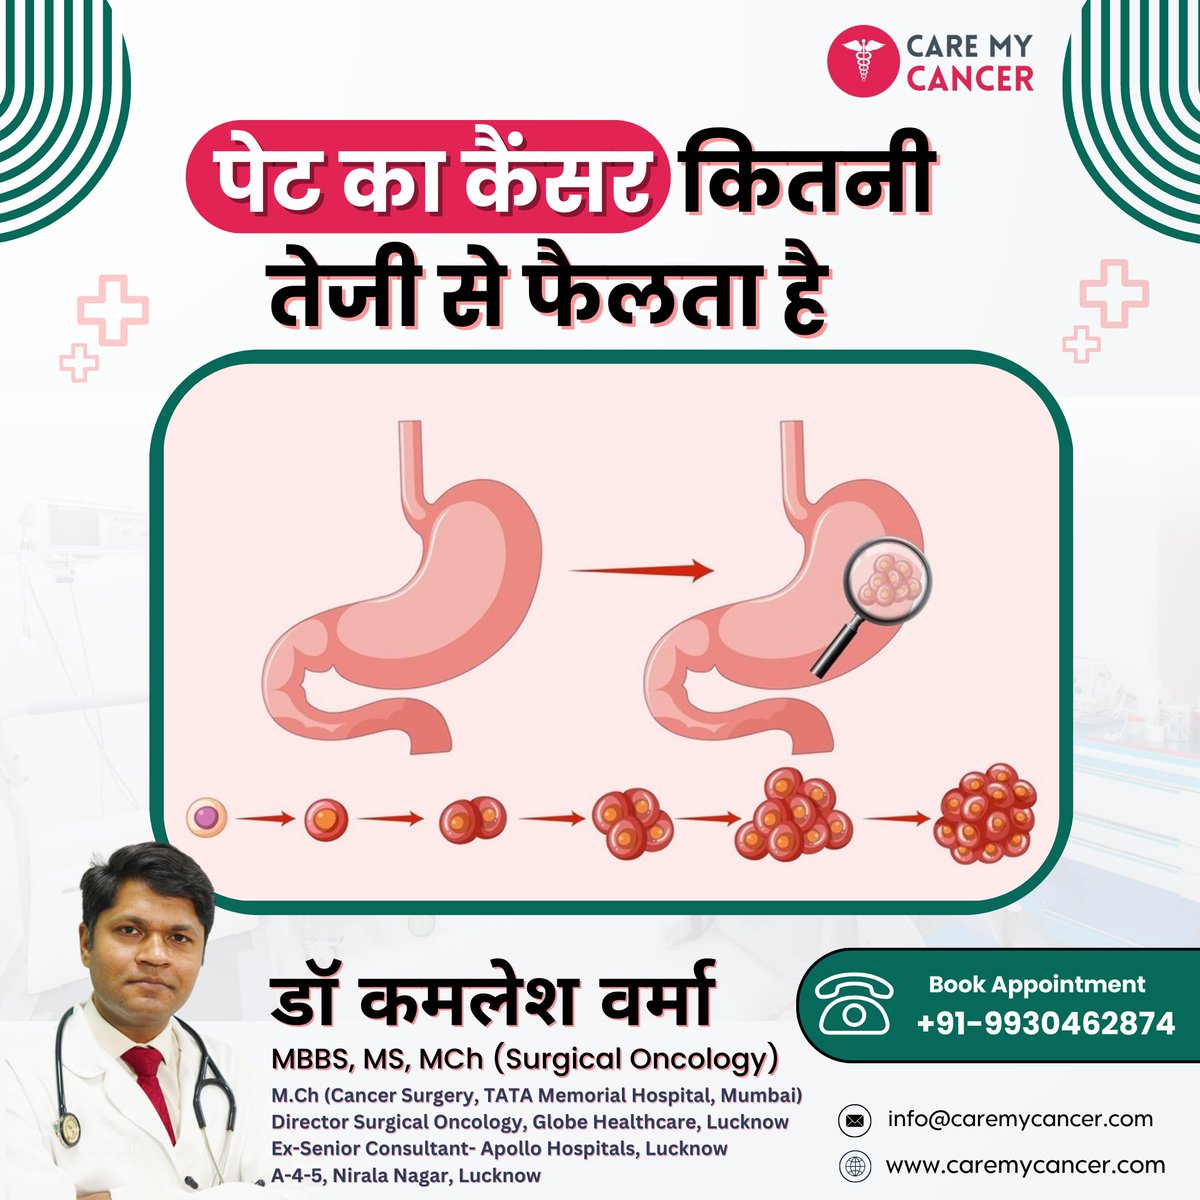 Did you know that stomach cancer can spread swiftly through the body? Learn more about its rapid progression from Dr. Kamlesh Verma. Stay informed, stay healthy! 

#CancerAwareness #HealthTip #StomachCancer #CancerTreatment #DrKamleshVerma #Oncologist #Lucknow